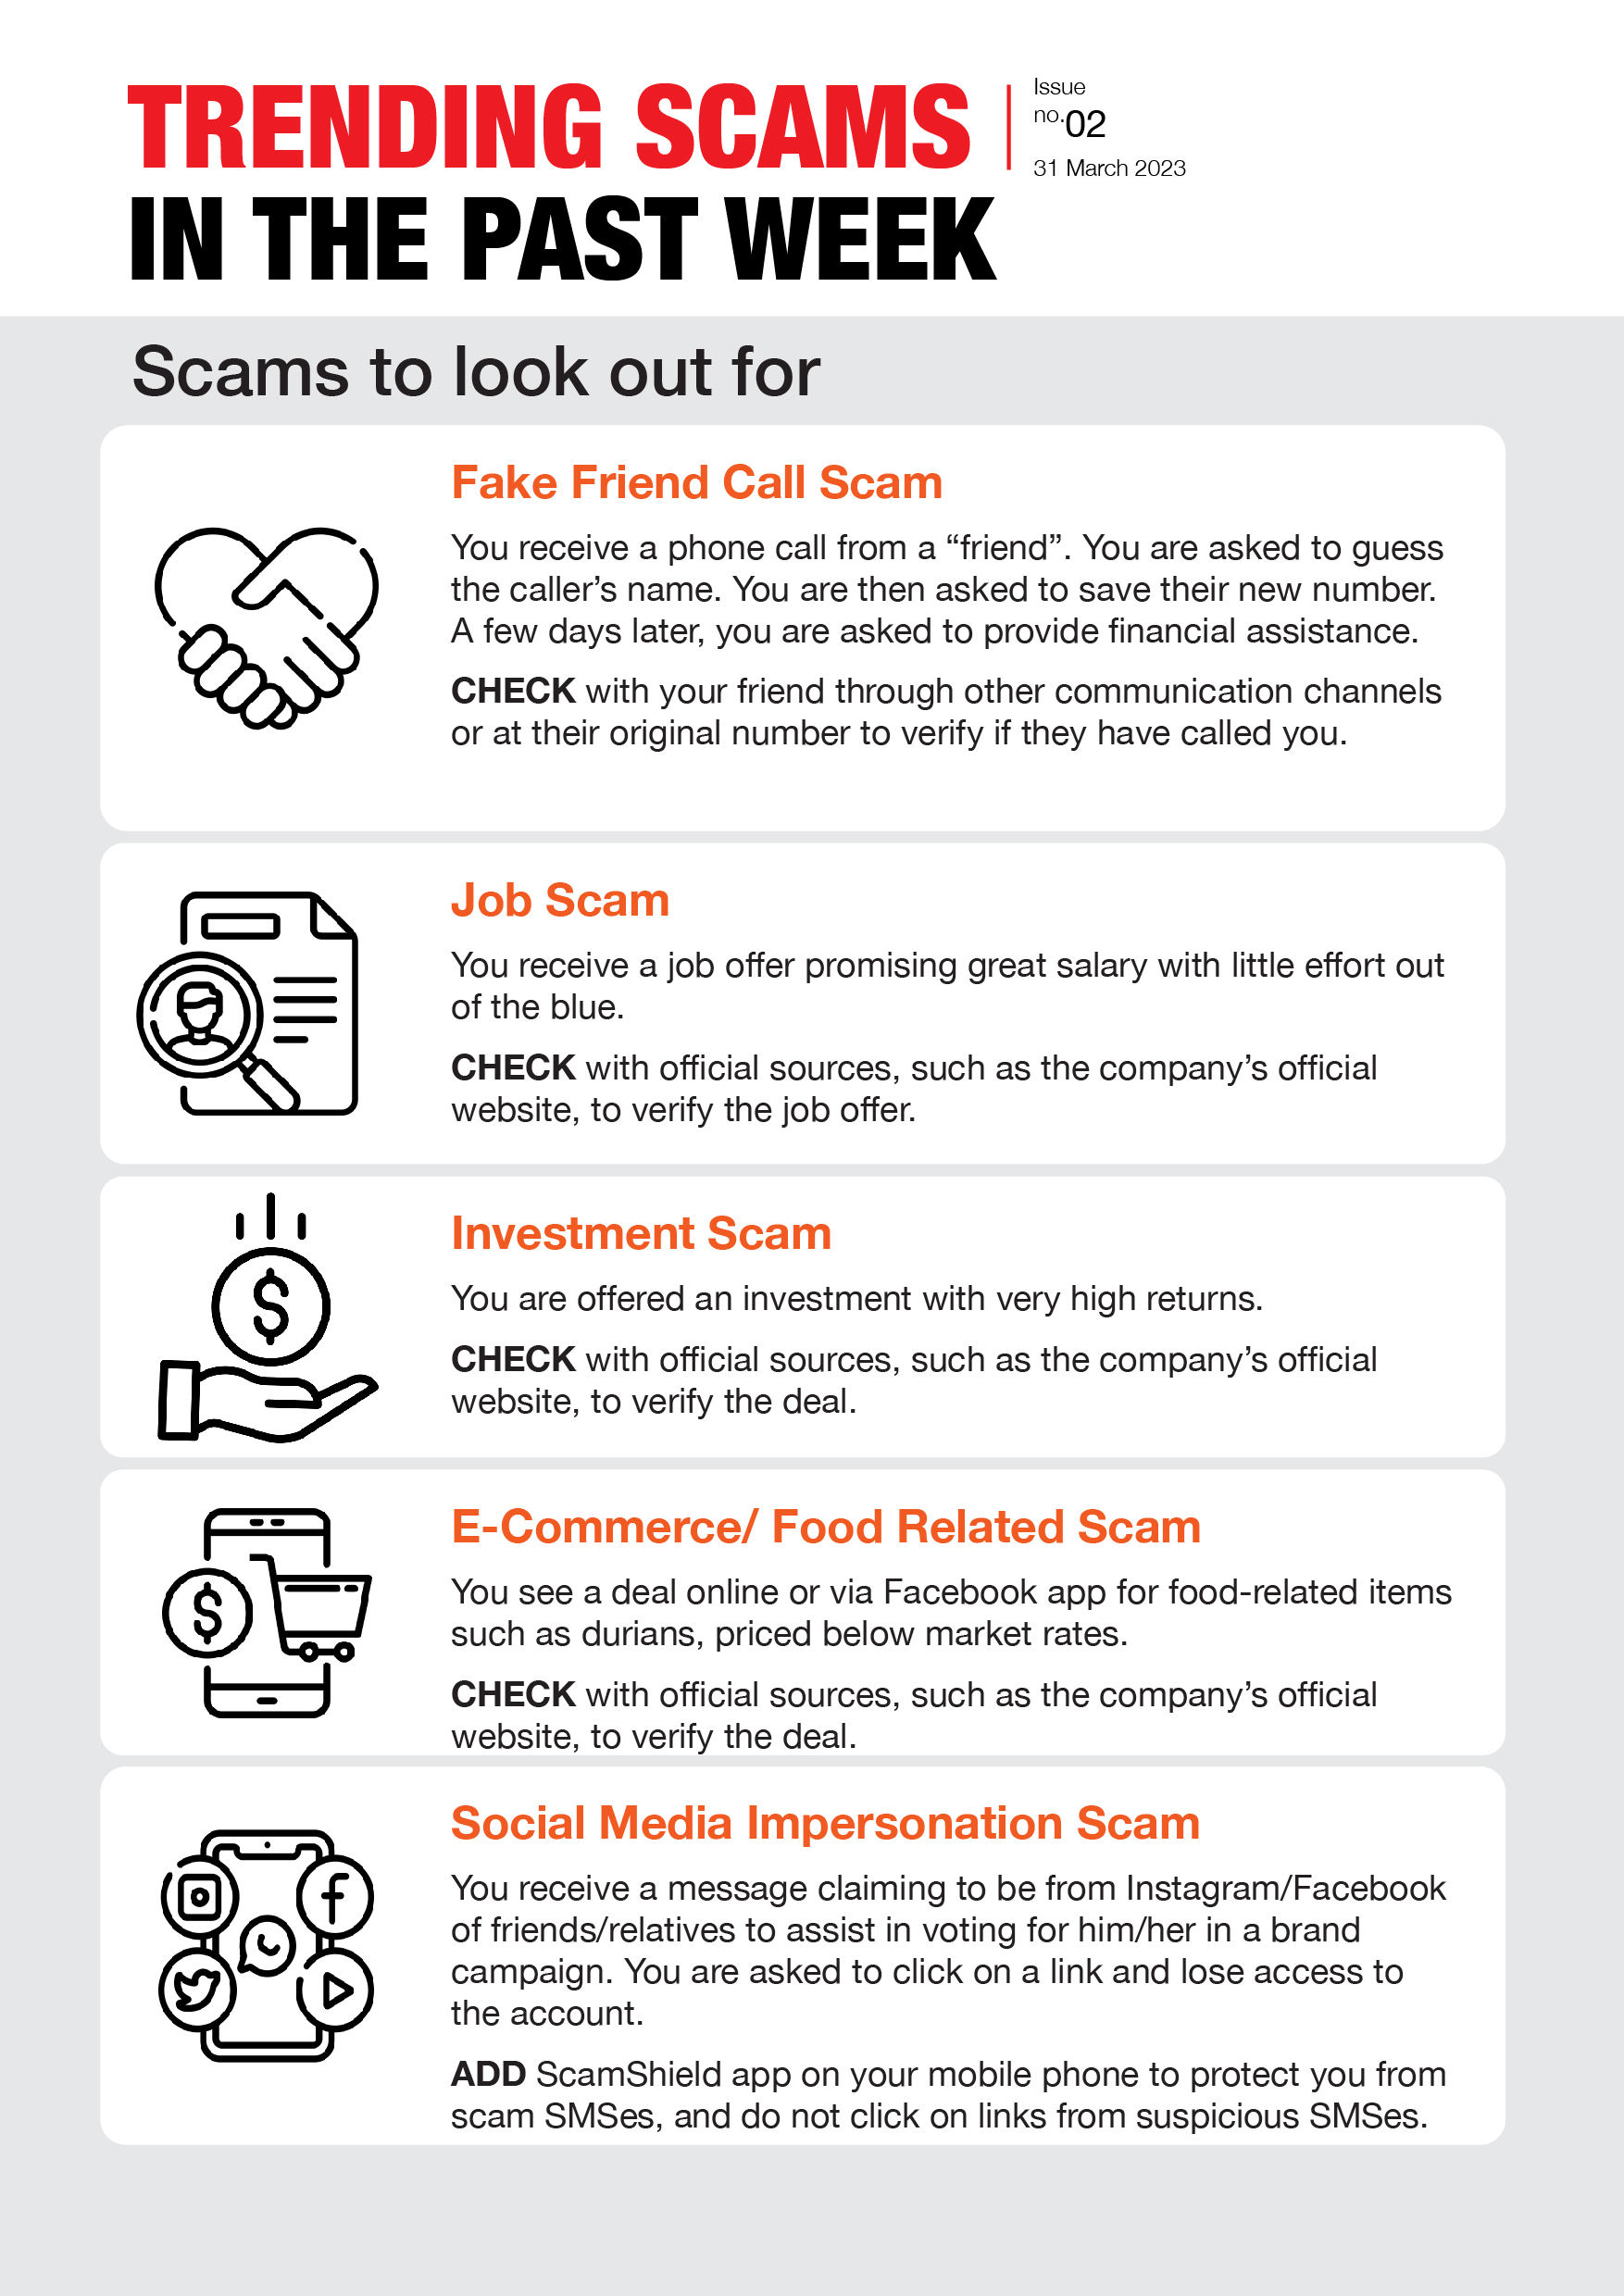 Weekly Bulletin Issue 2 - Scams to look out for